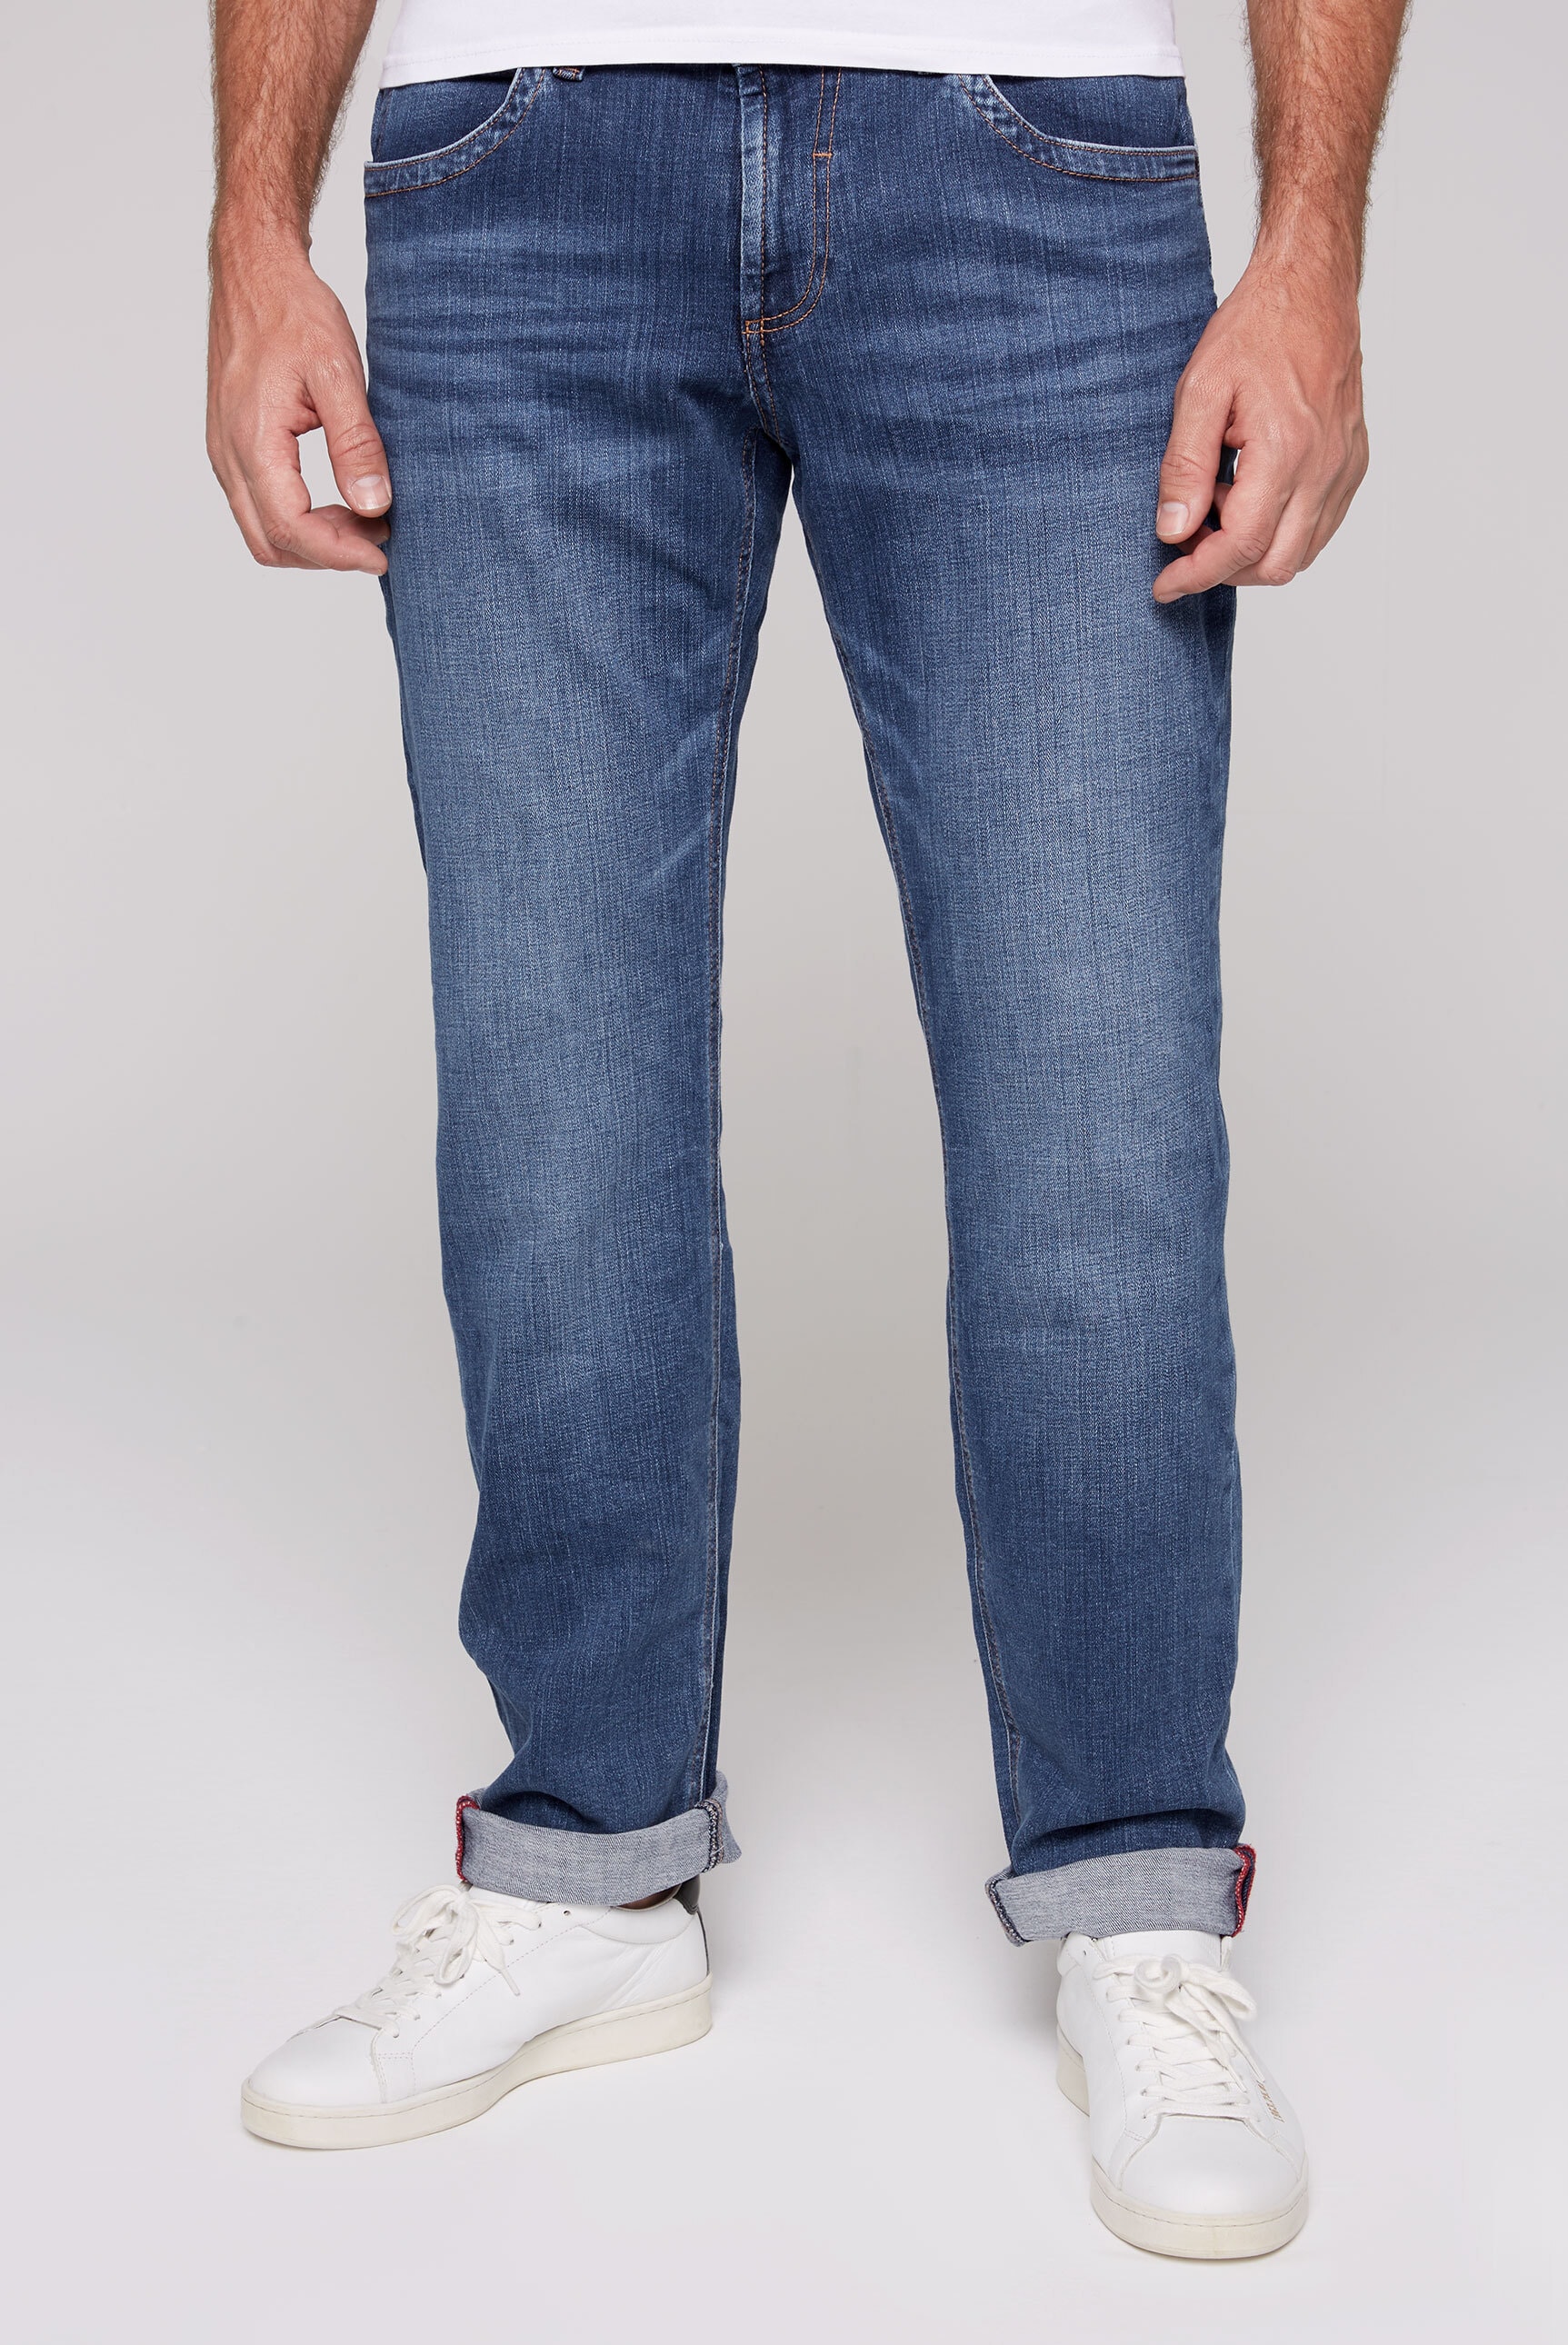 CAMP DAVID Regular-fit-Jeans, mit Used-Waschung